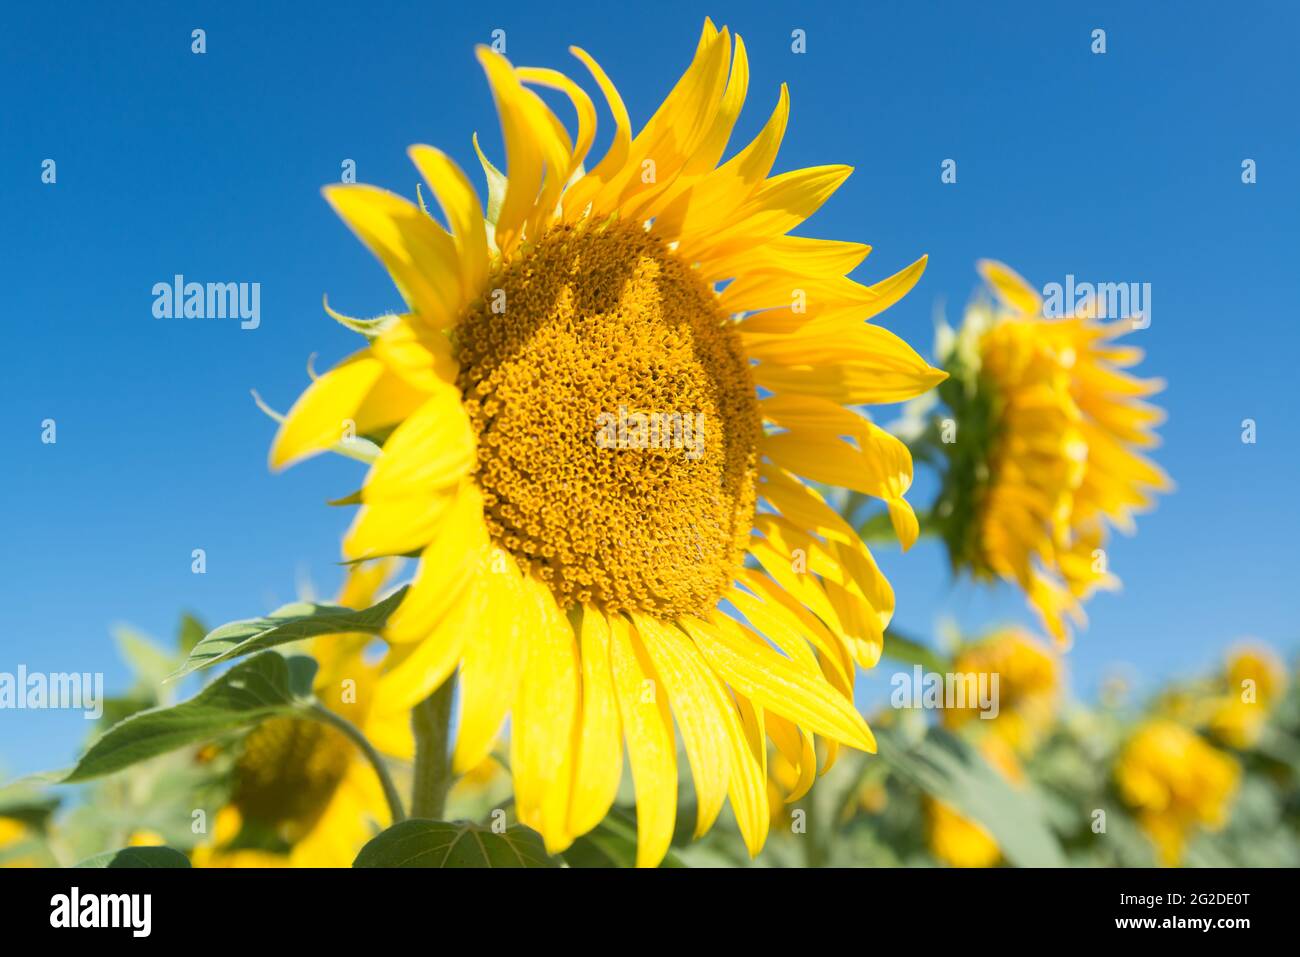 Sunflower in Field of Sunflowers against Bright Blue Sky Stock Photo